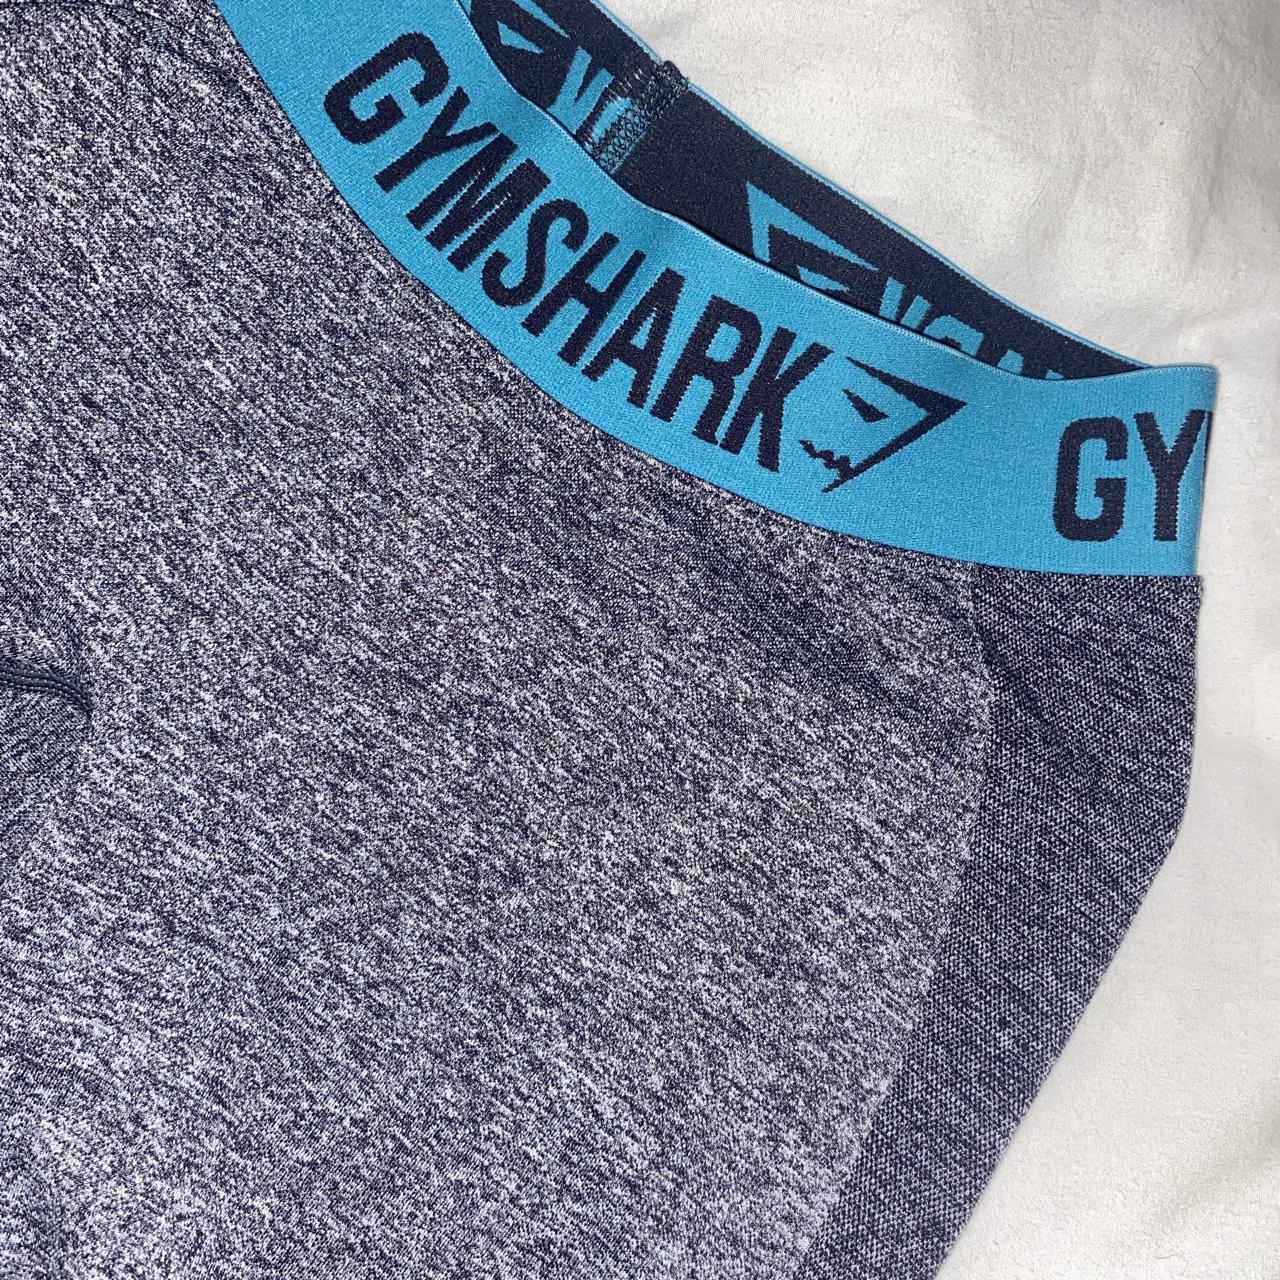 Size small grey and turquoise gym shark - Depop